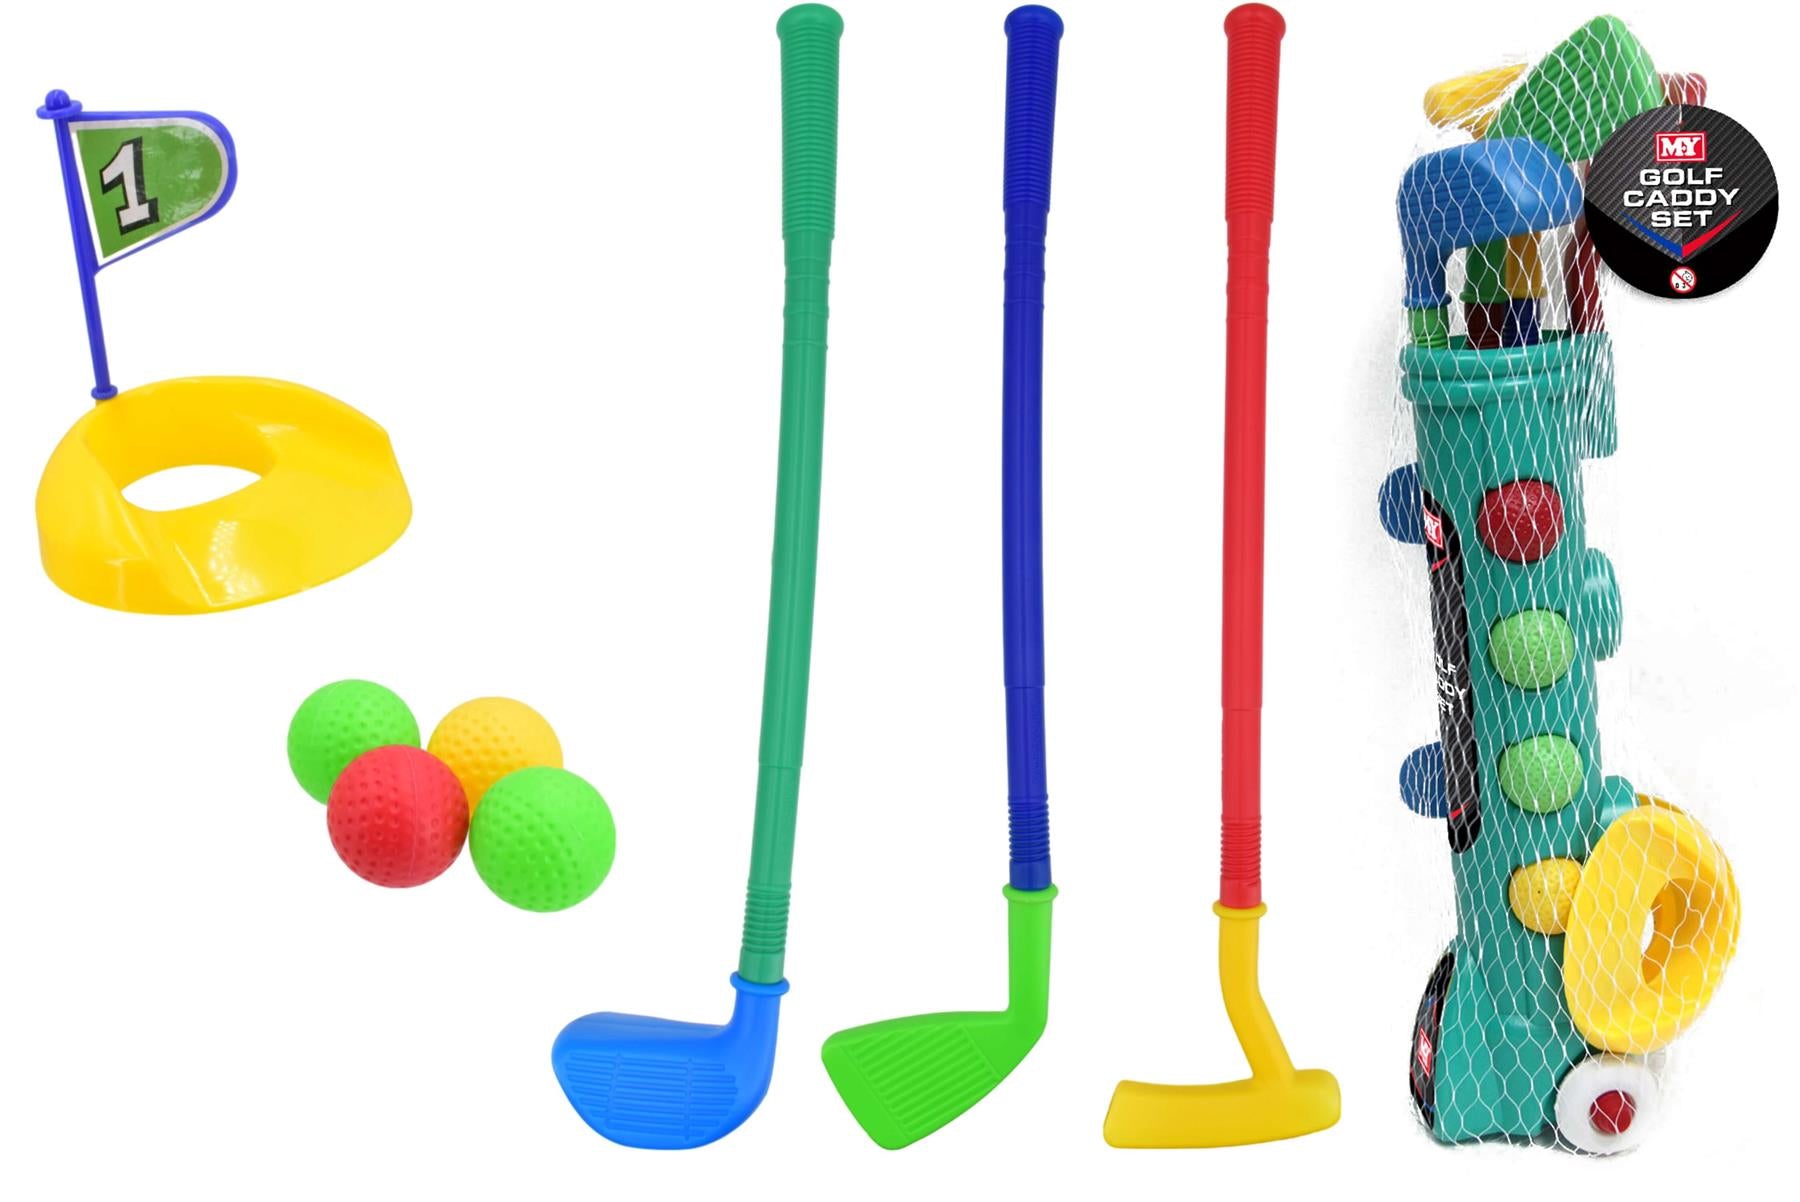 Children's Colourful Golf Caddy Outdoor Toy Playset